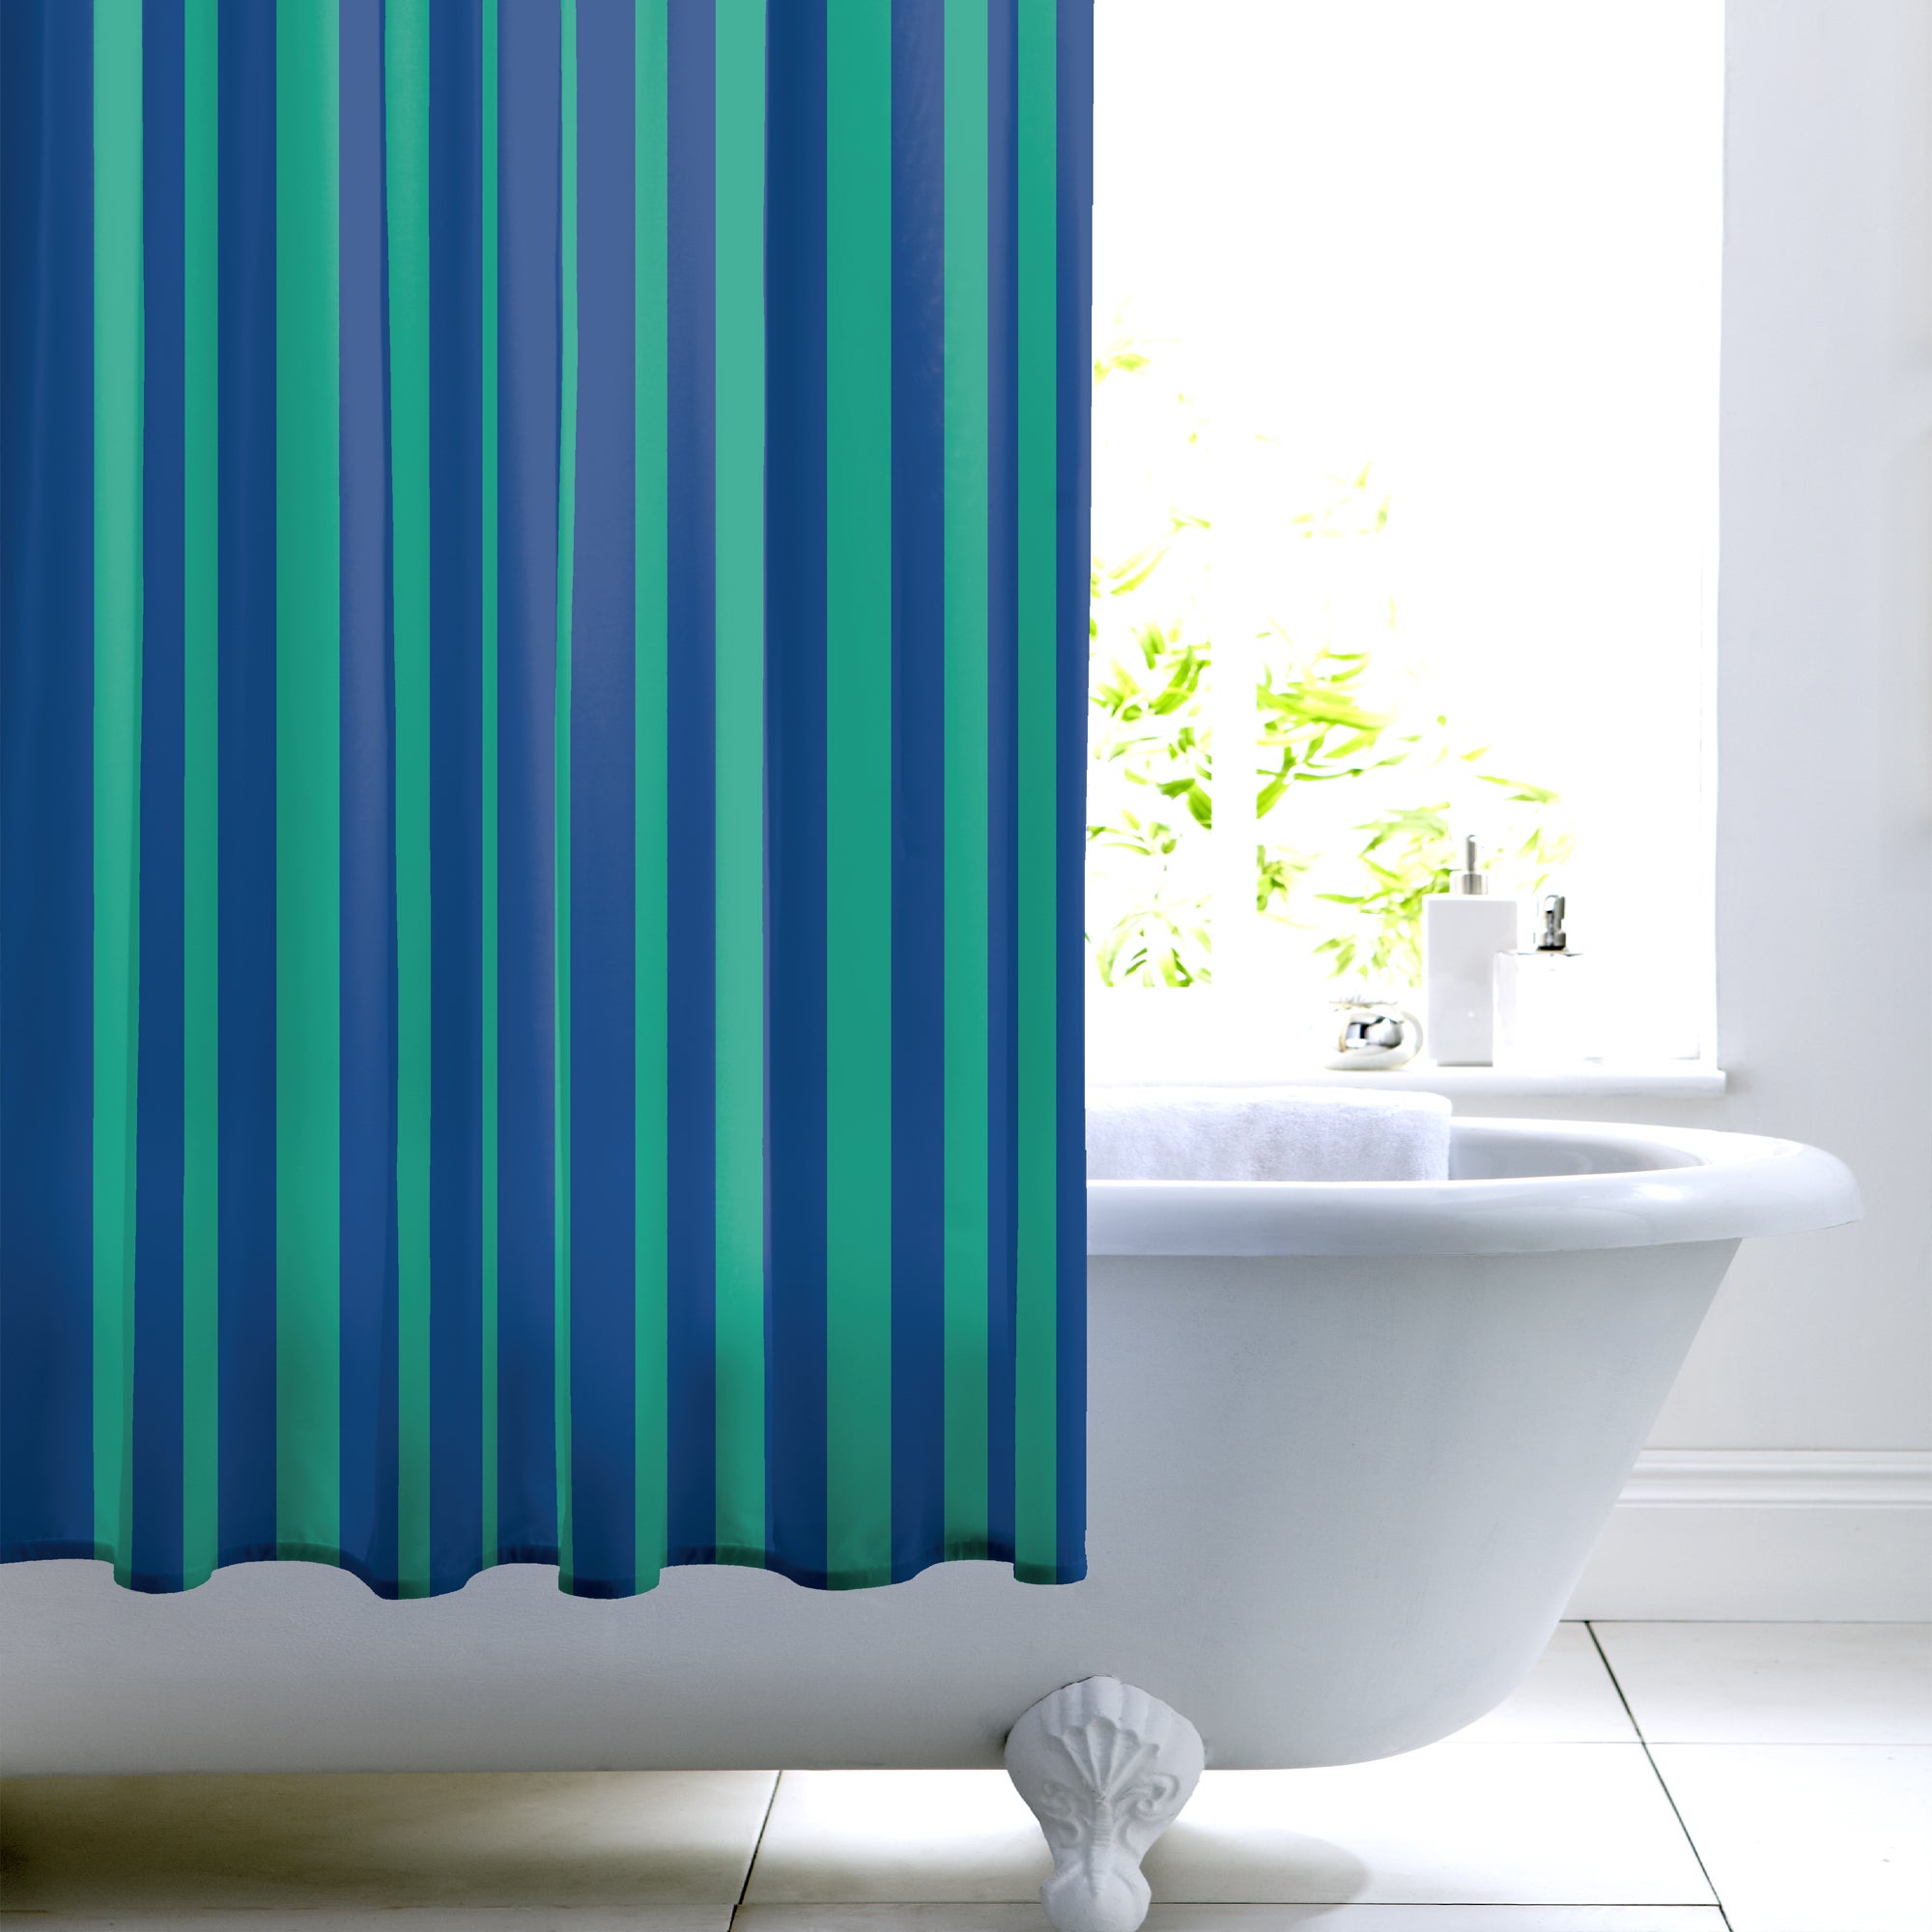 1pc Peacock Shower Curtain With Green Bamboo And Bird Pattern, Bathroom  Bathtub Decorative Divider Curtain With Hooks